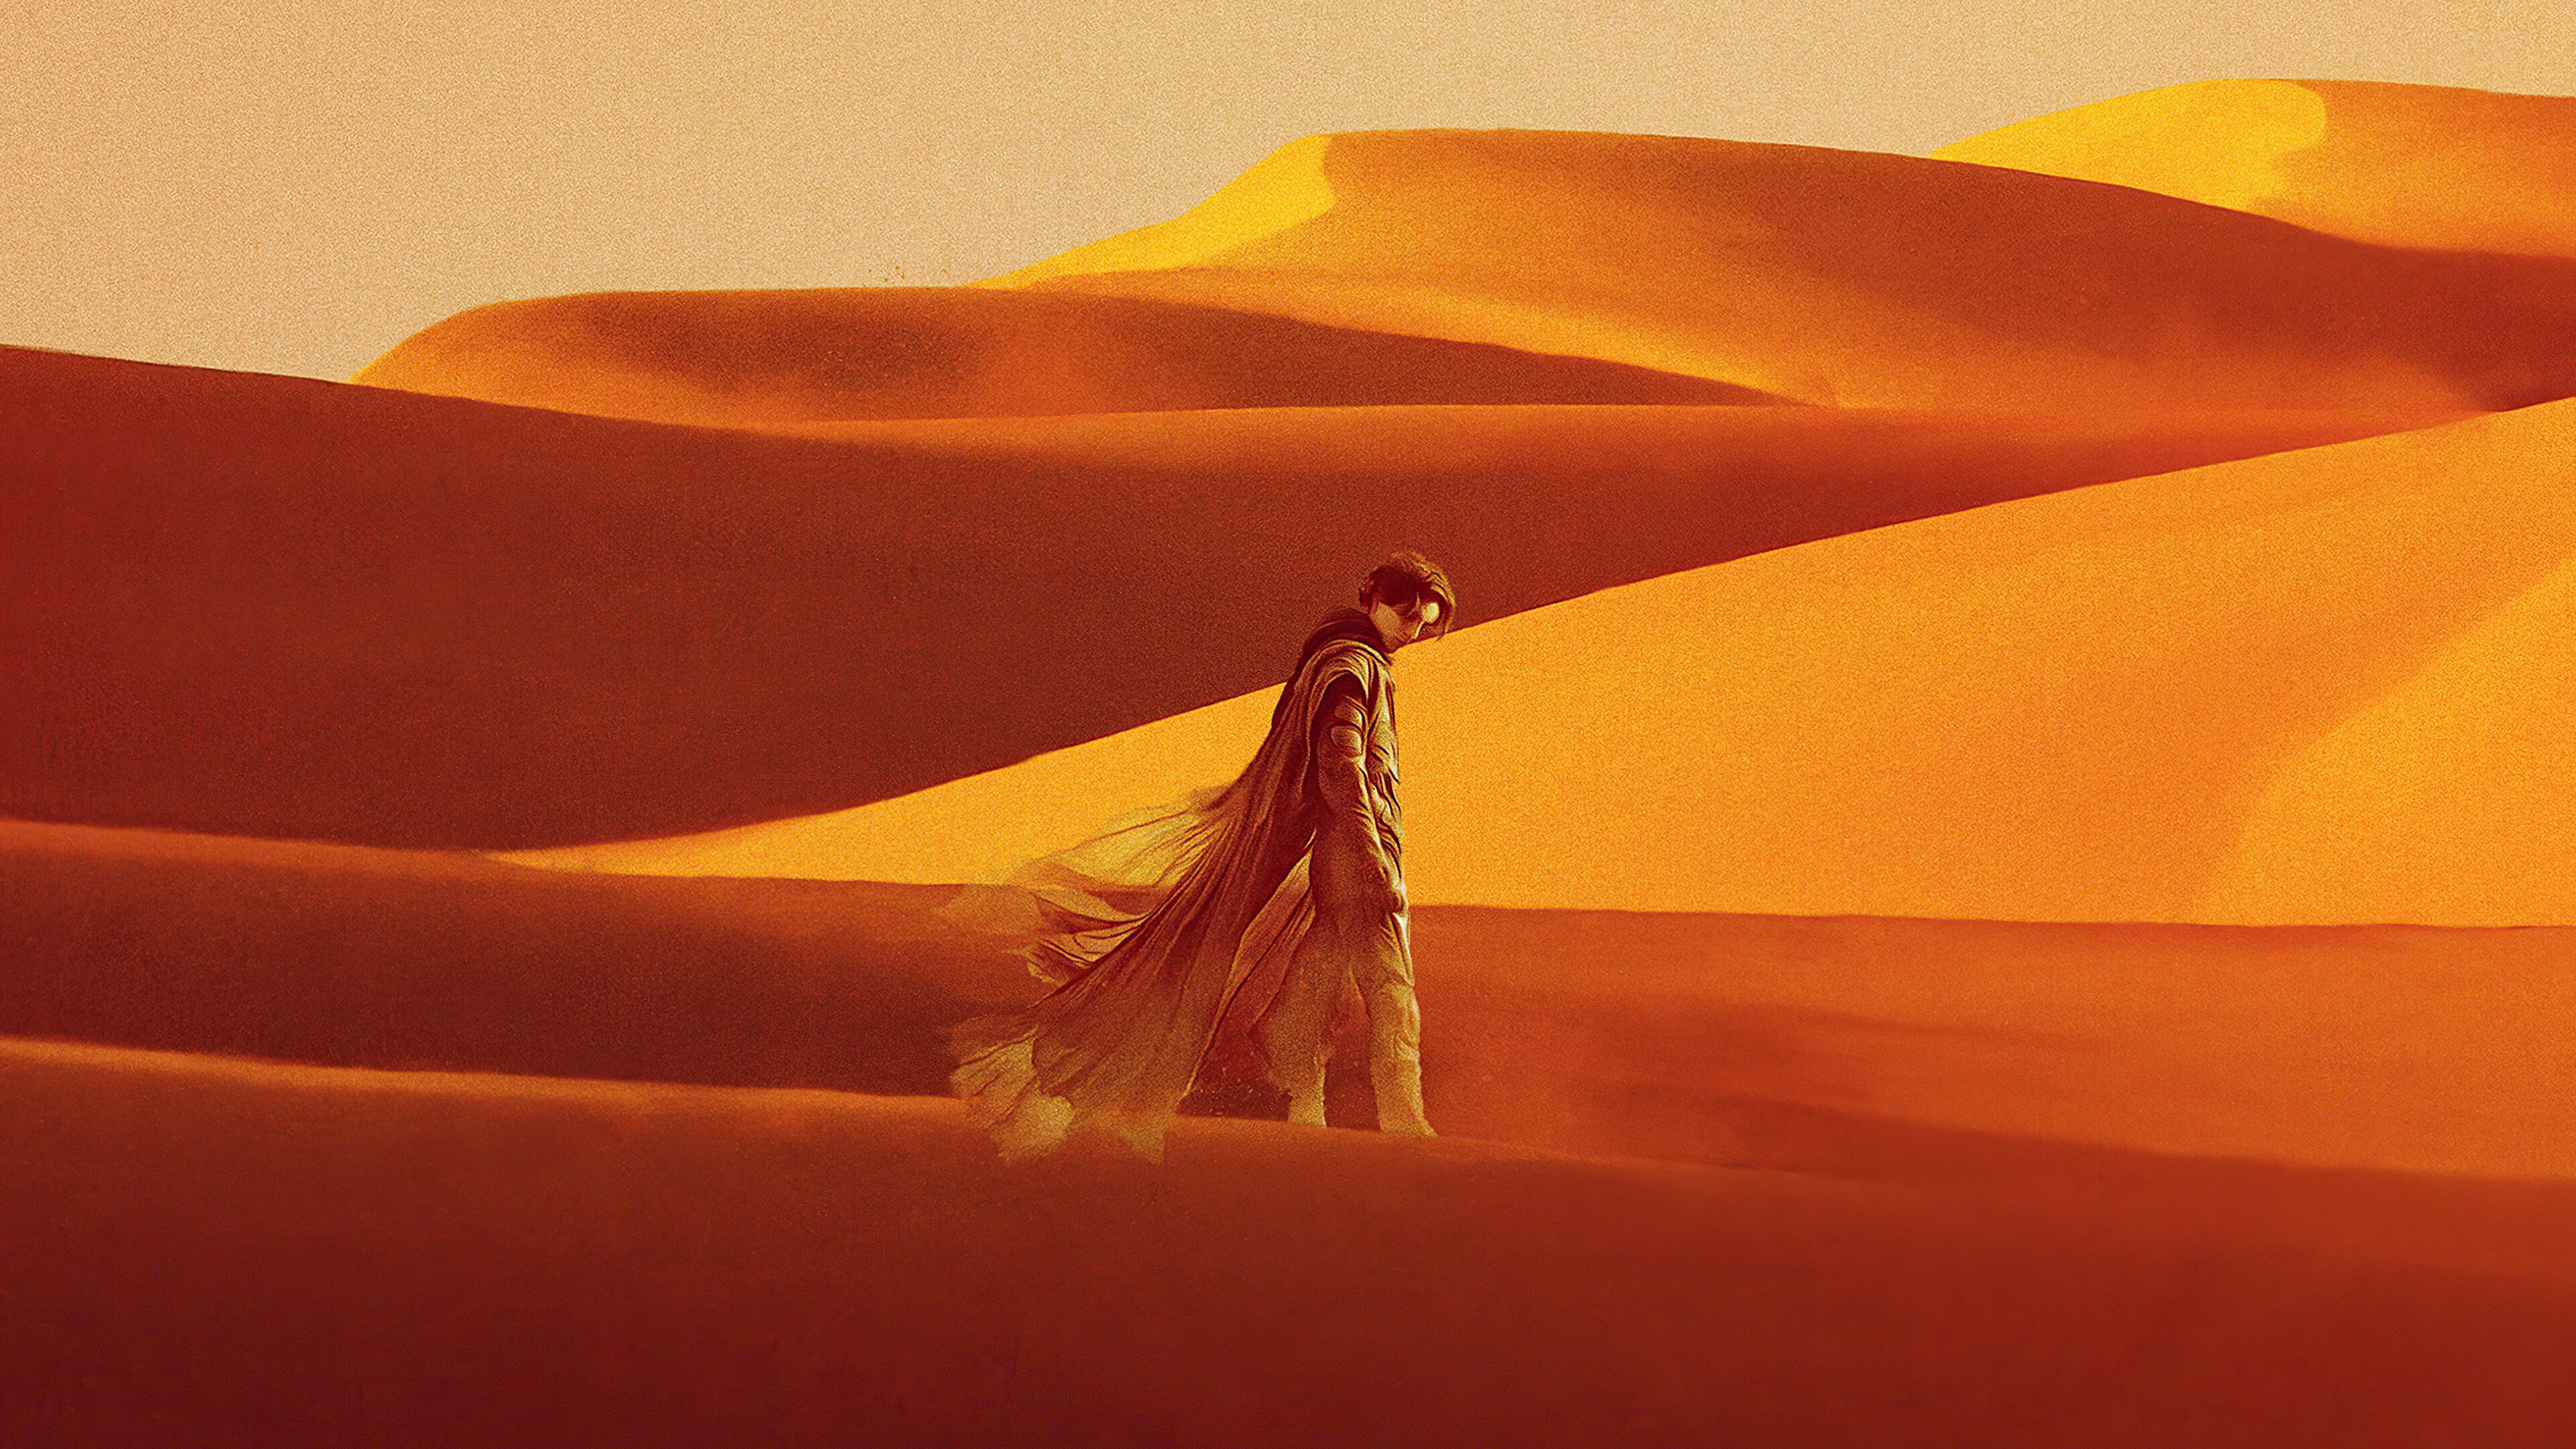 Dune: Part One: Among its numerous awards and nominations, it received 10 nominations at the 94th Academy Awards, including Best Picture and Best Adapted Screenplay. 3840x2160 4K Background.